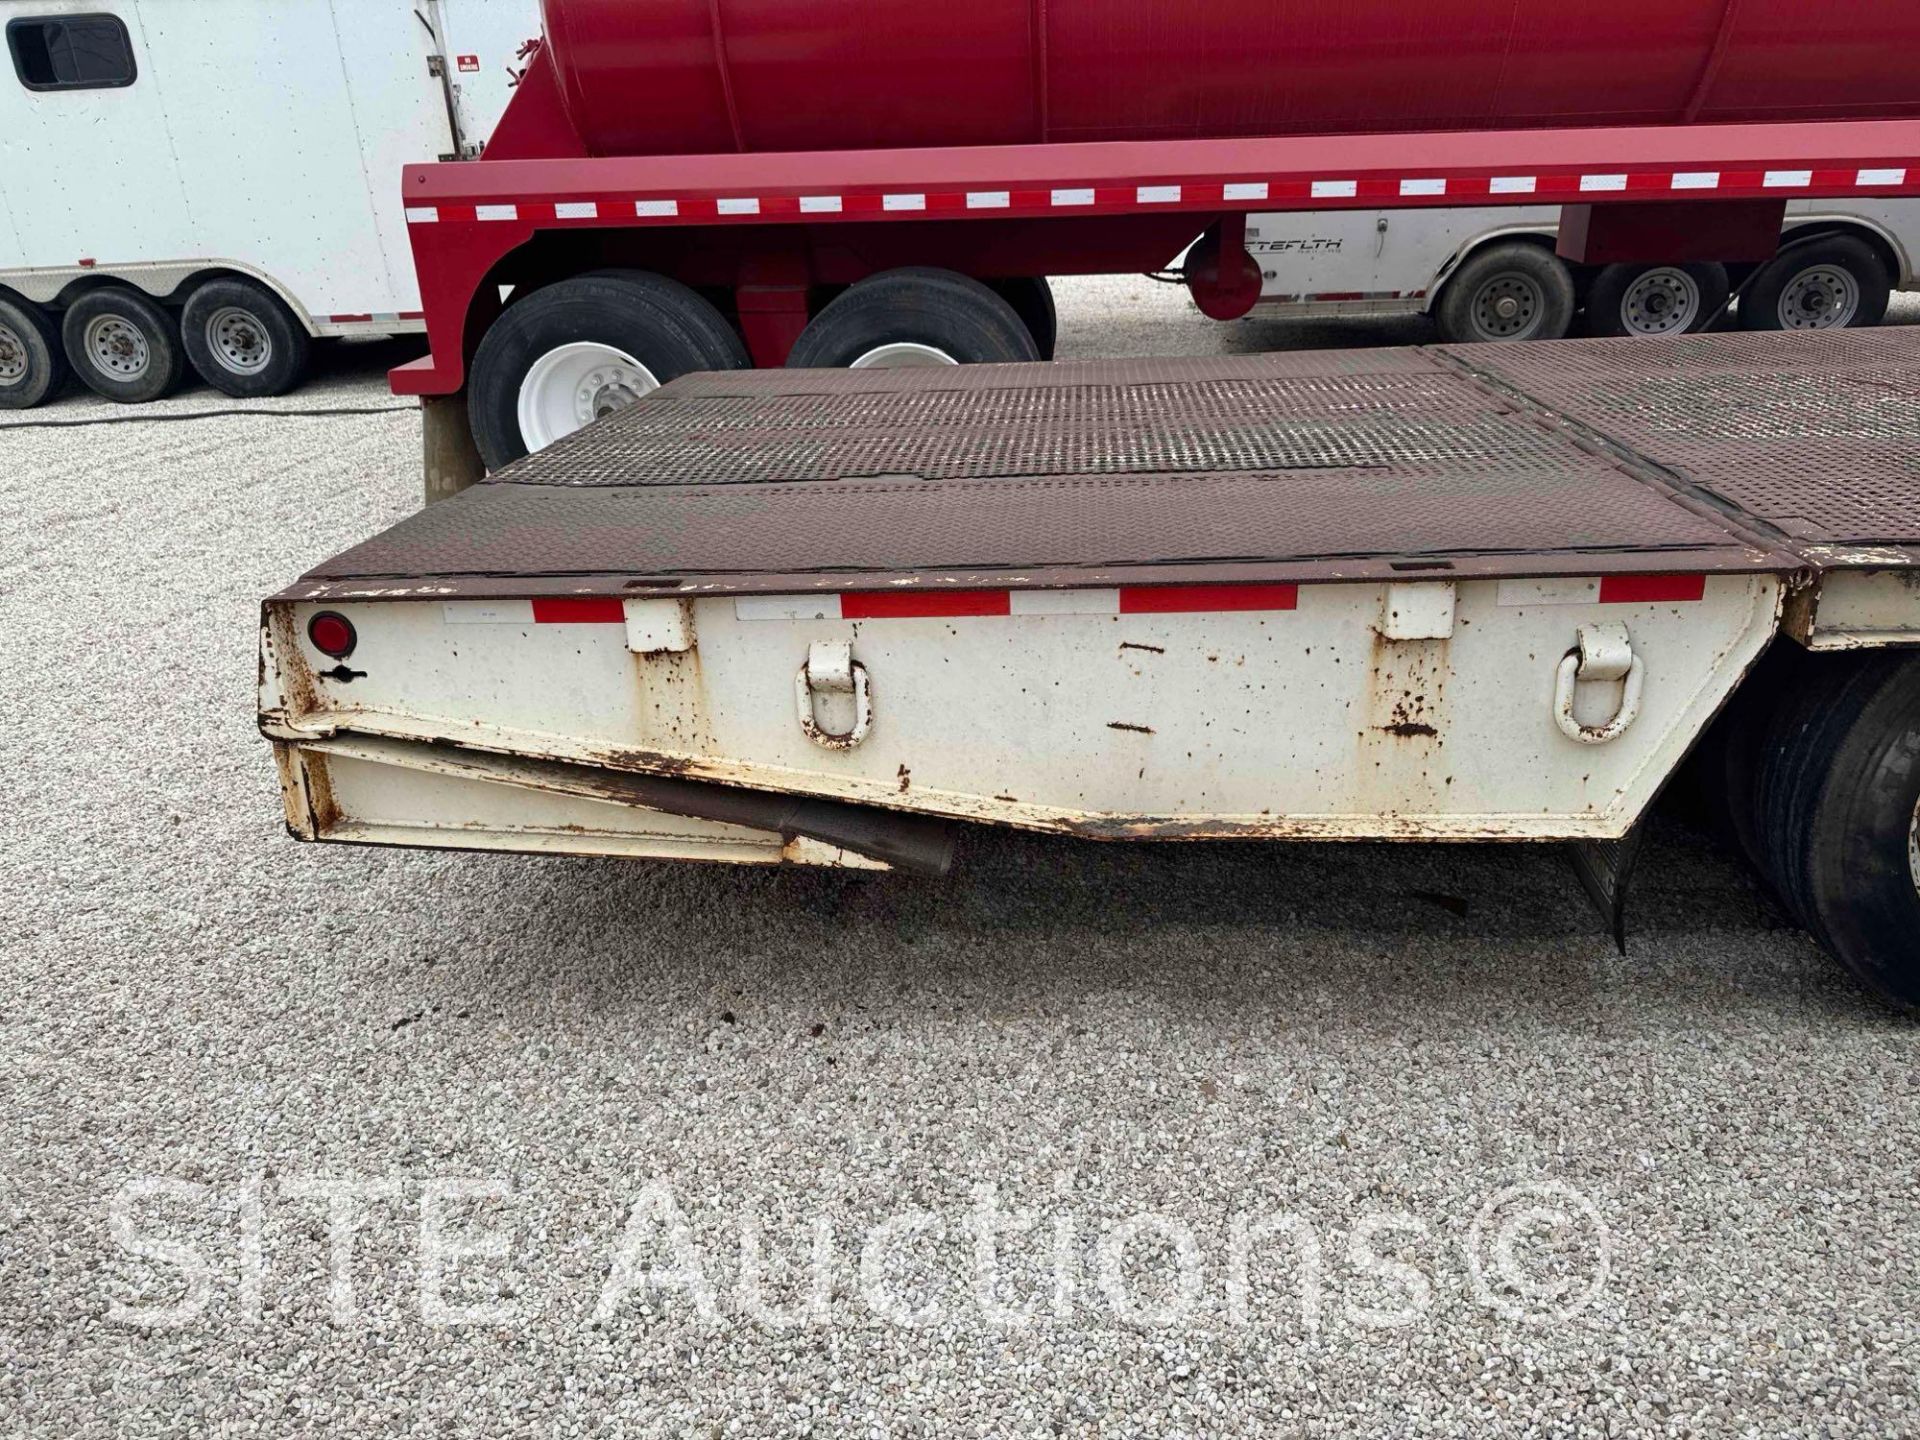 2003 Trail King TK70HT-482 T/A Hydraulic Tail Trailer - Image 2 of 10